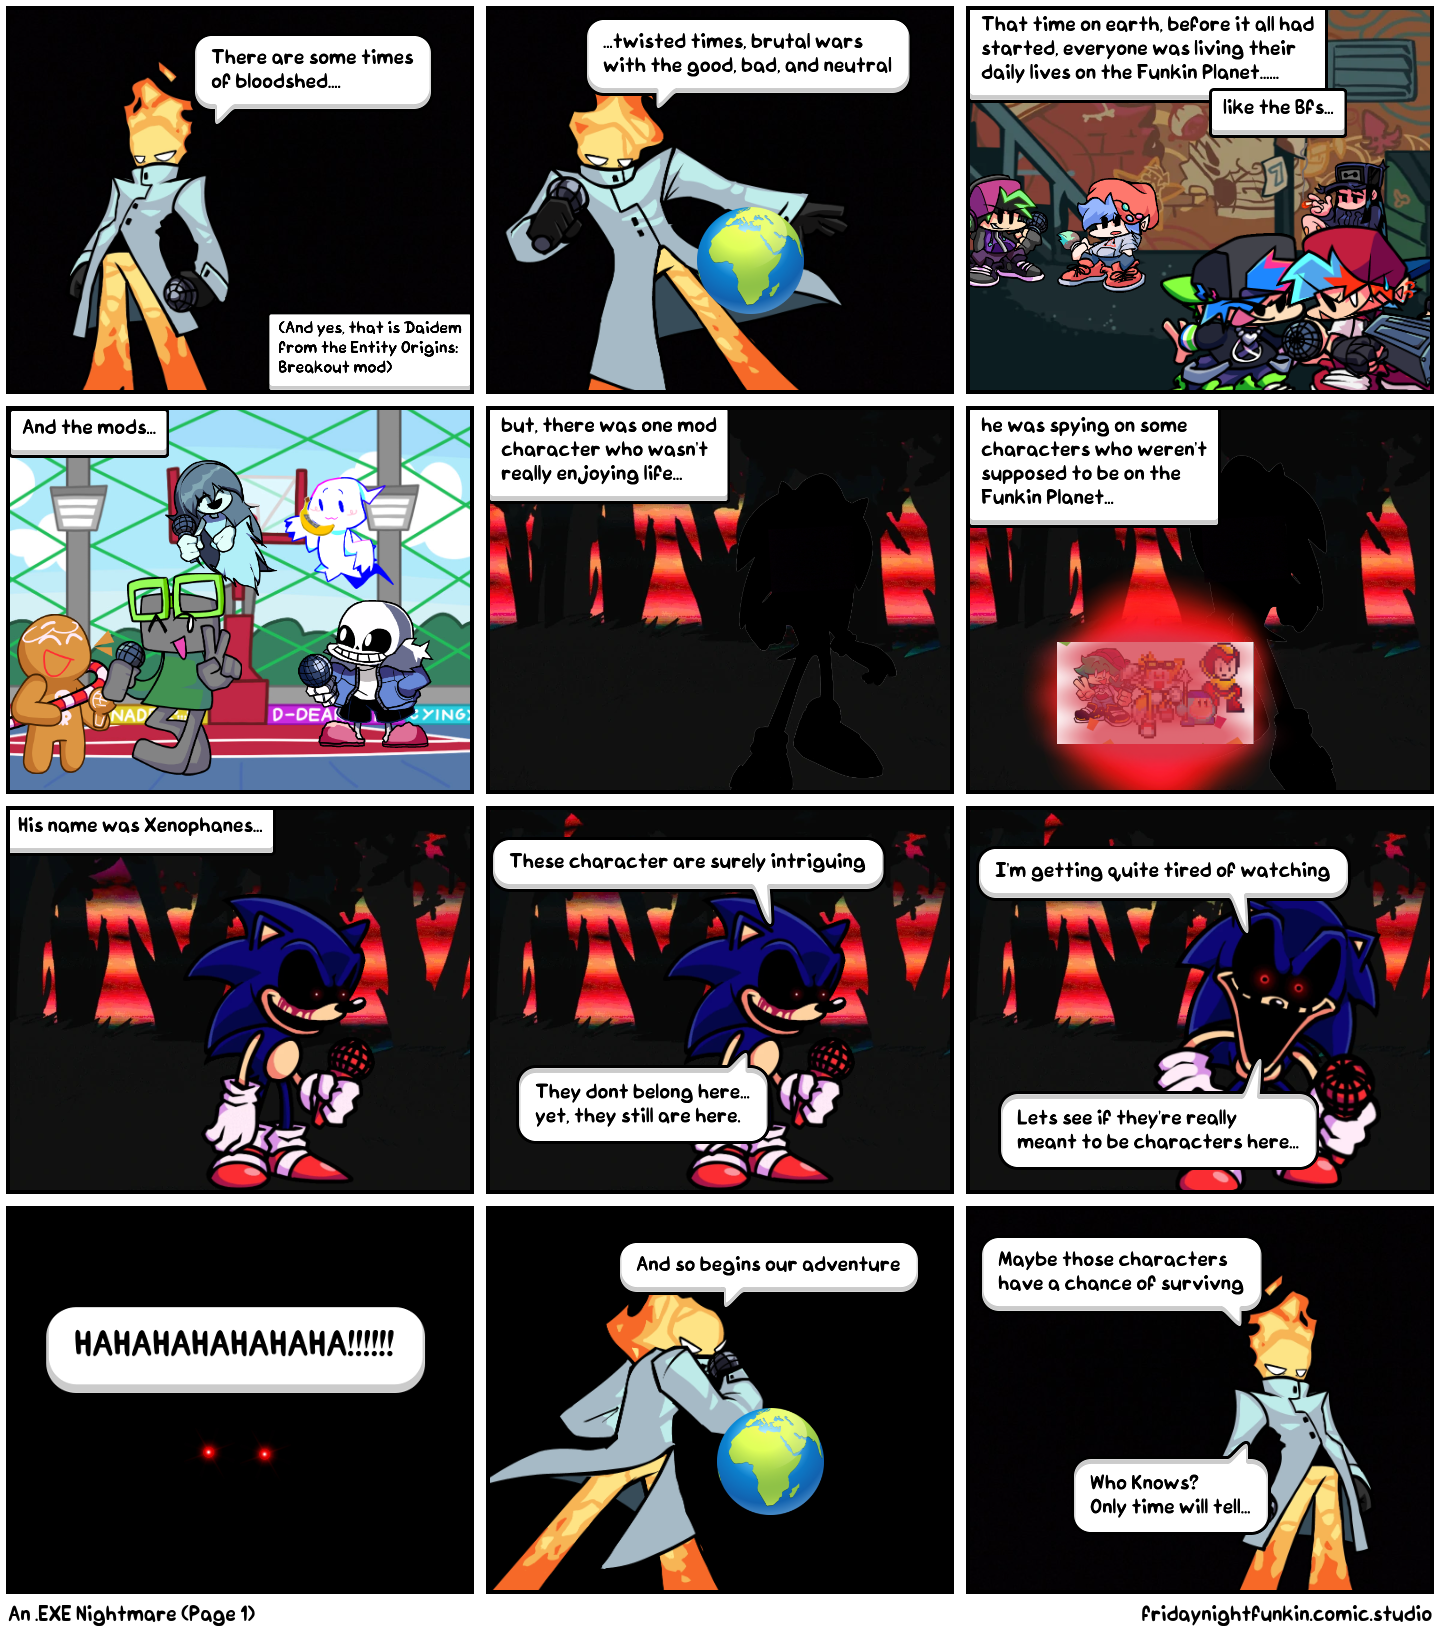 An .EXE Nightmare (Page 1)